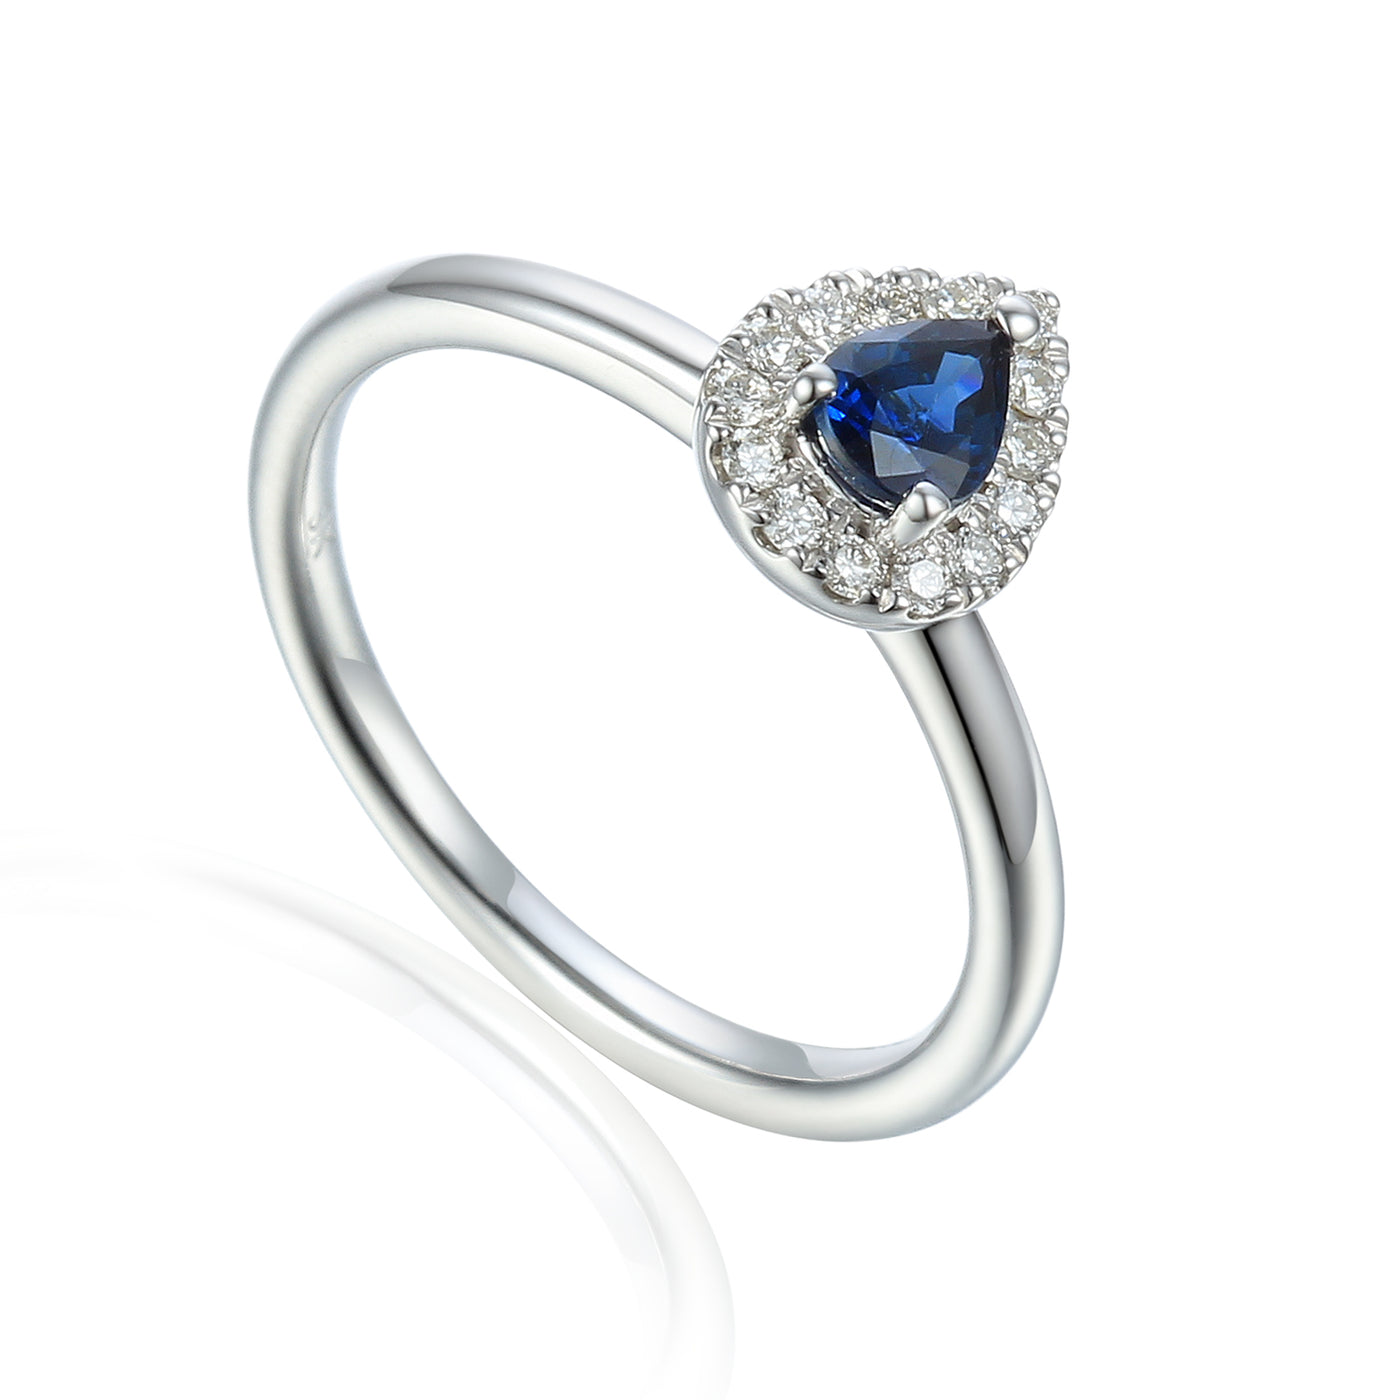 9ct White Gold Pear Shape Sapphire Ring and Diamond Cluster Birthstone Ring